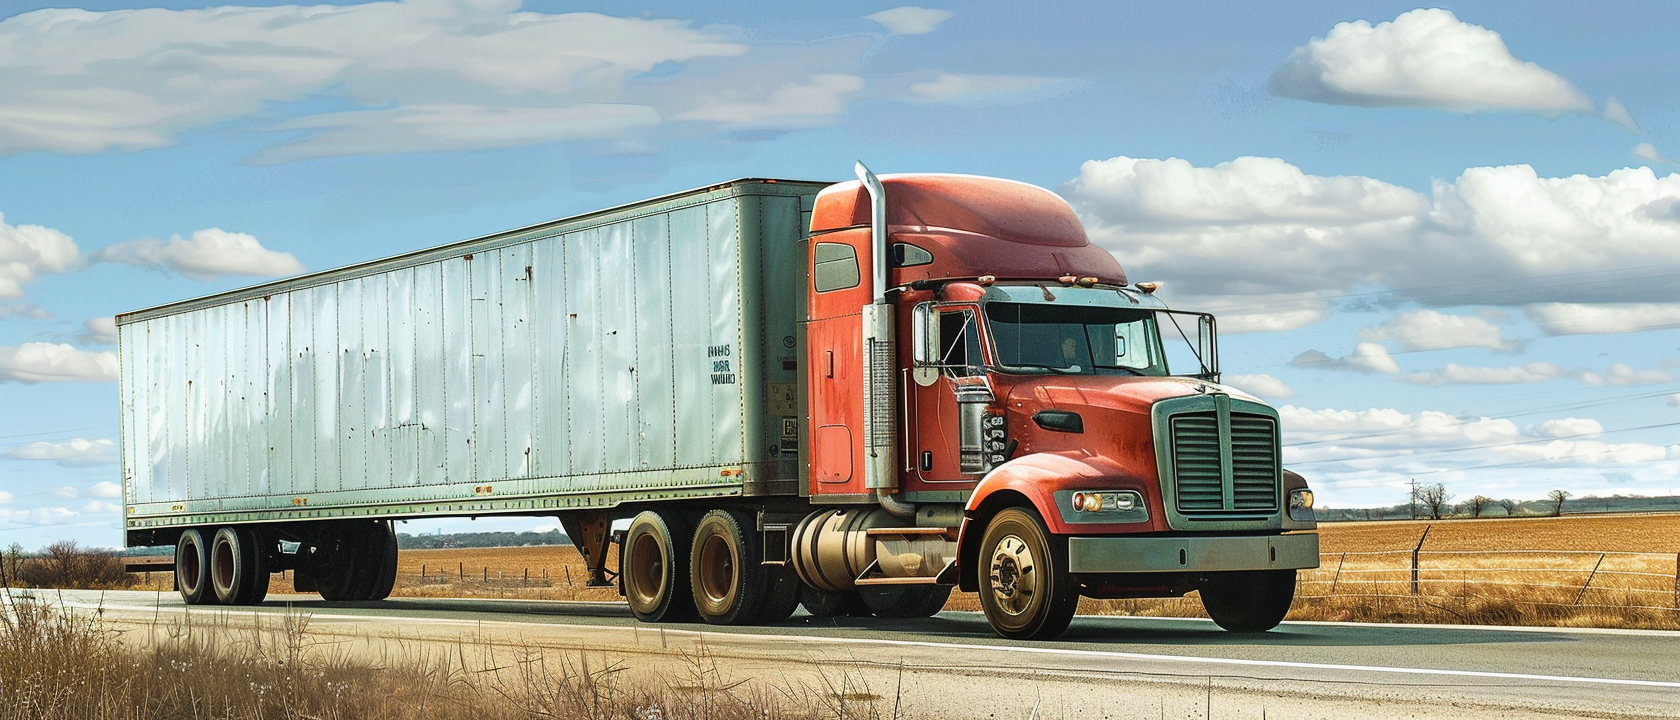 92-Year-Old Trucking Giant Crumbles Under Economic Strain